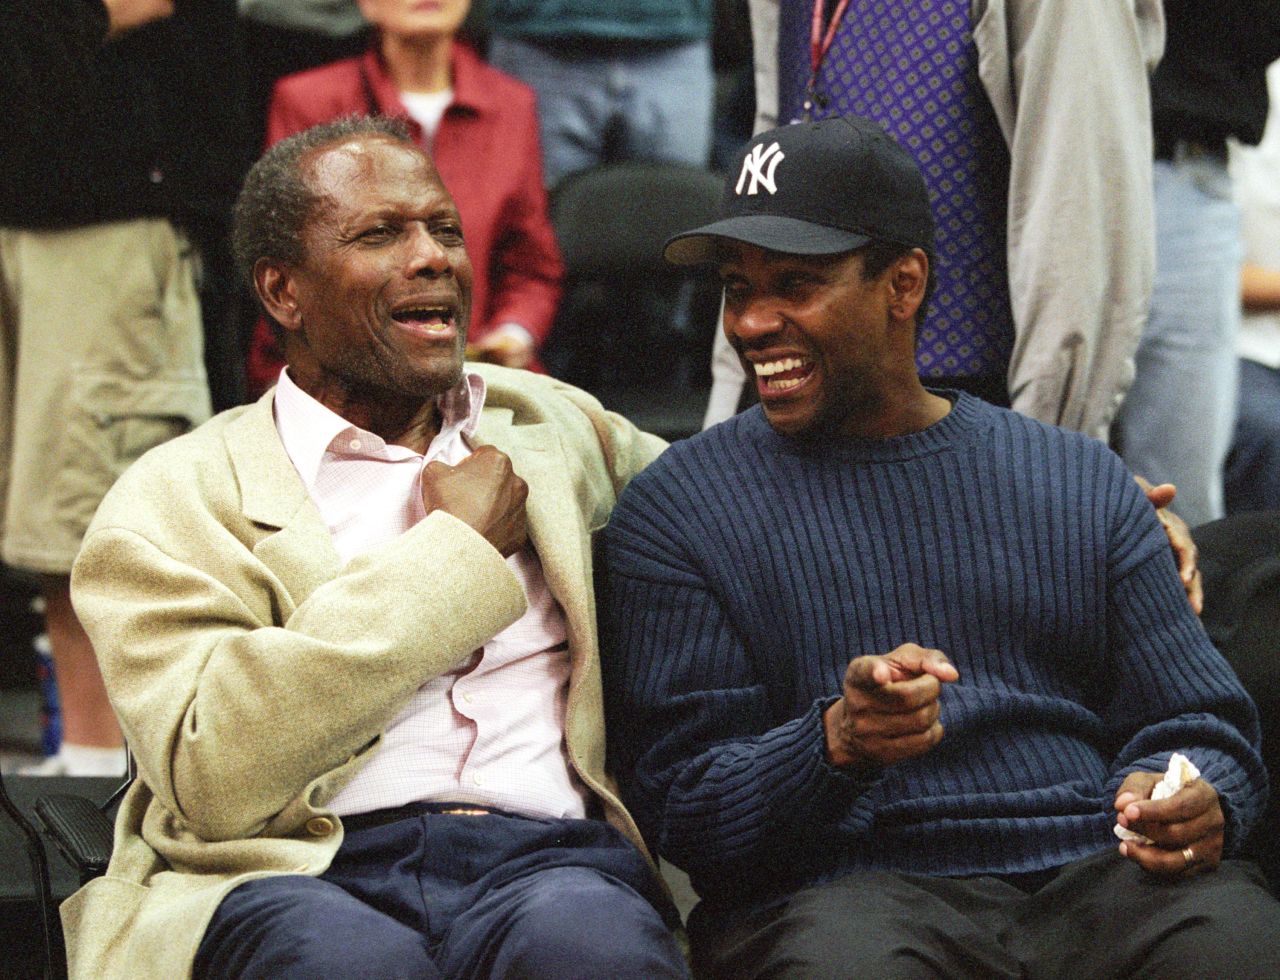 Poitier laughs with actor Denzel Washington at an NBA playoff game in Los Angeles in 2002.